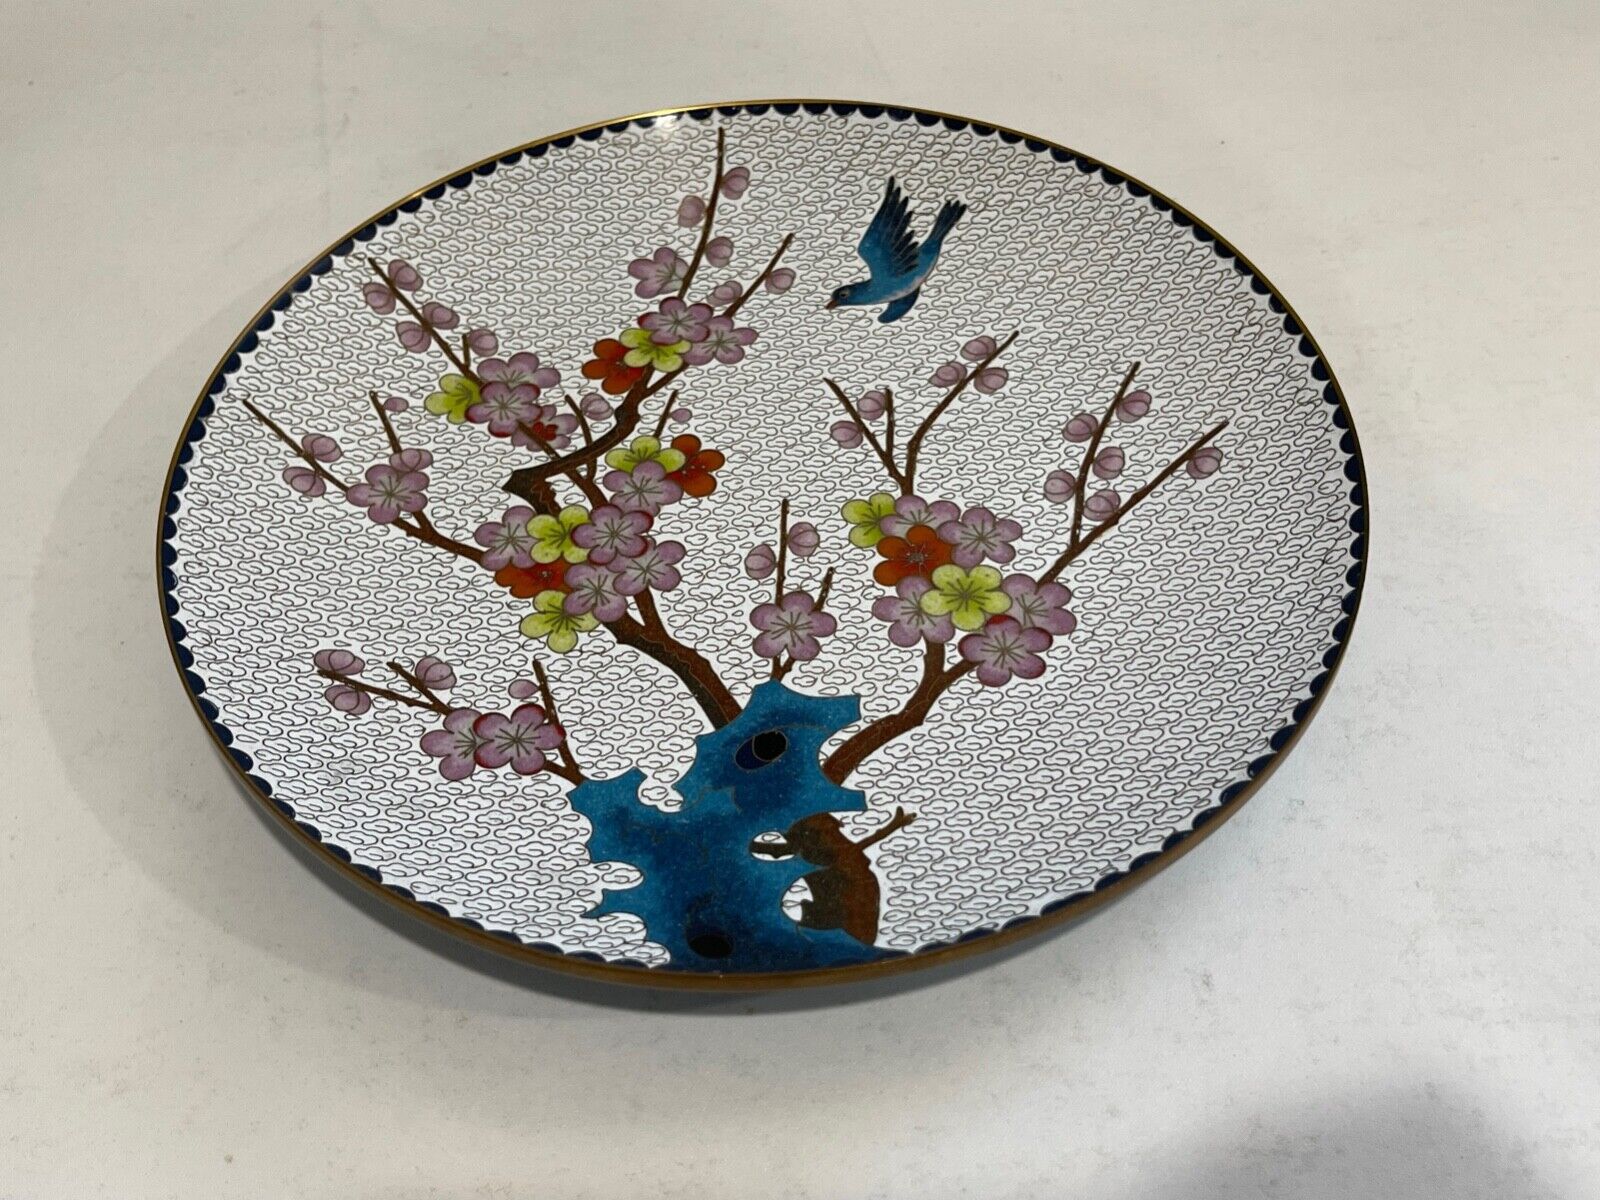 Possibly Vintage Chinese White Cloisonne Plate w/ Flowers on Tree & Bird Dec.